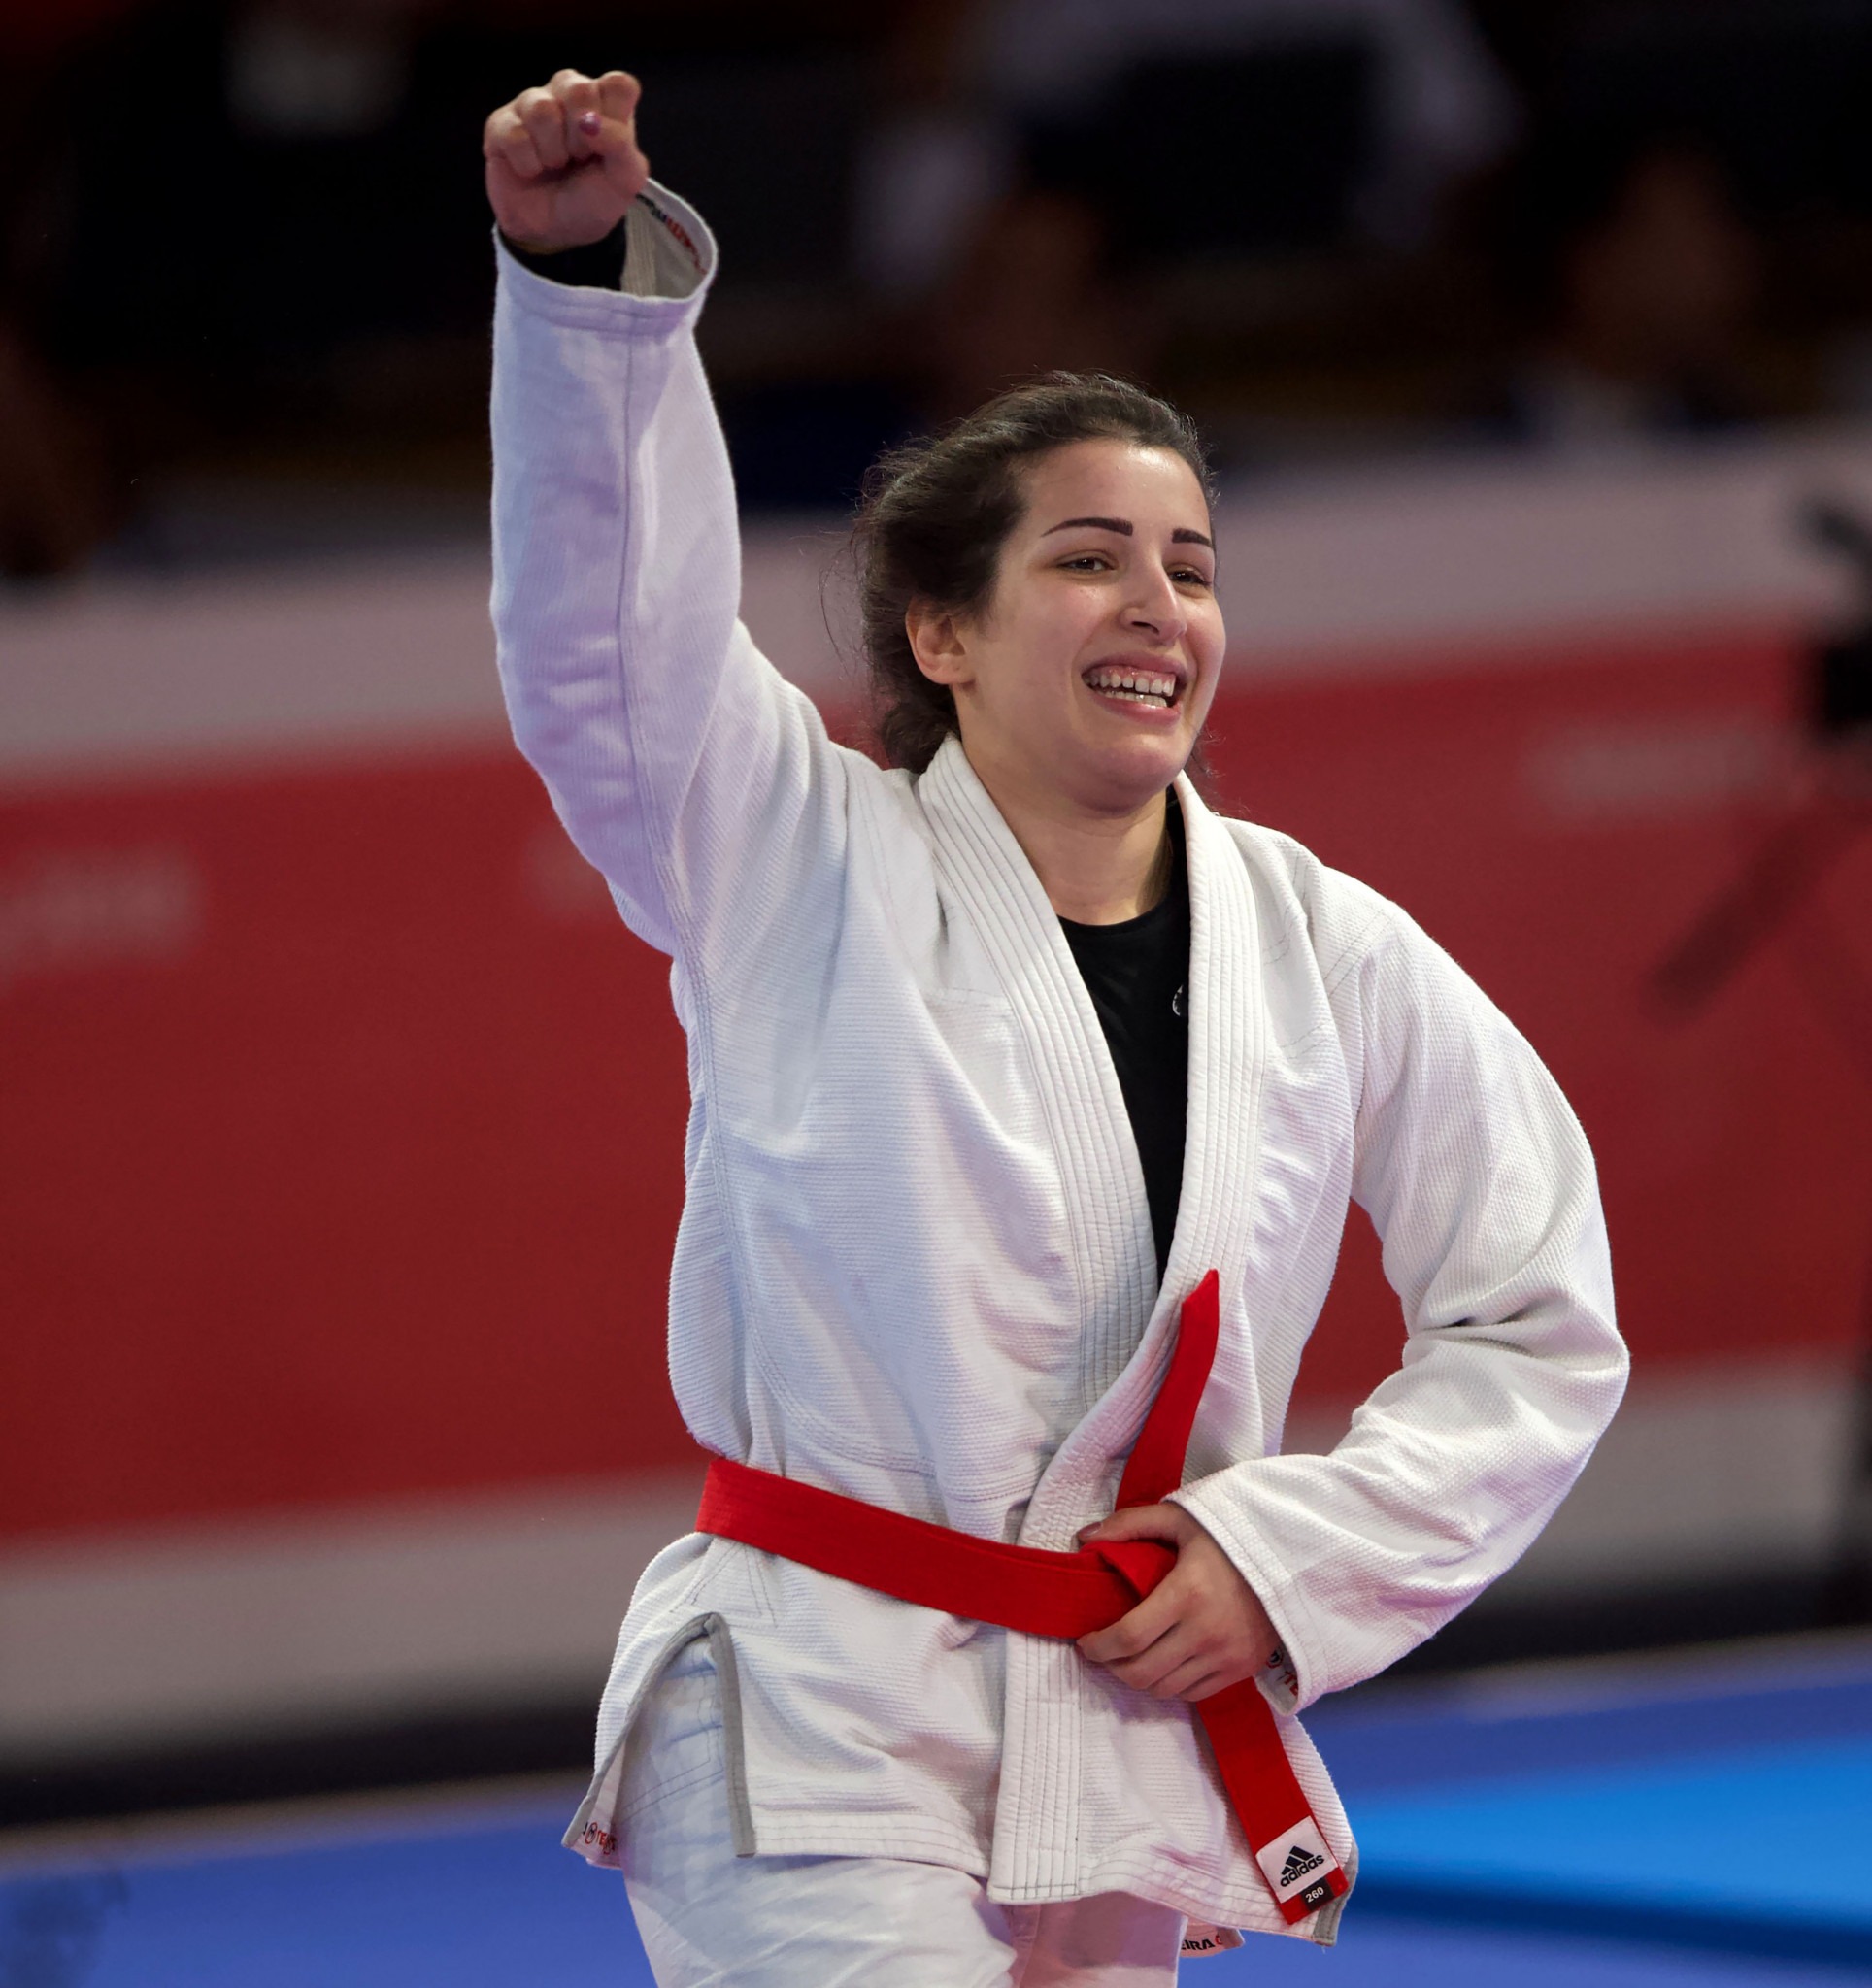 Yara Kakish is aiming to compete in the Abu Dhabi Extreme Championship (ADXC 2). JORDAN OLYMPIC COMMITTEE